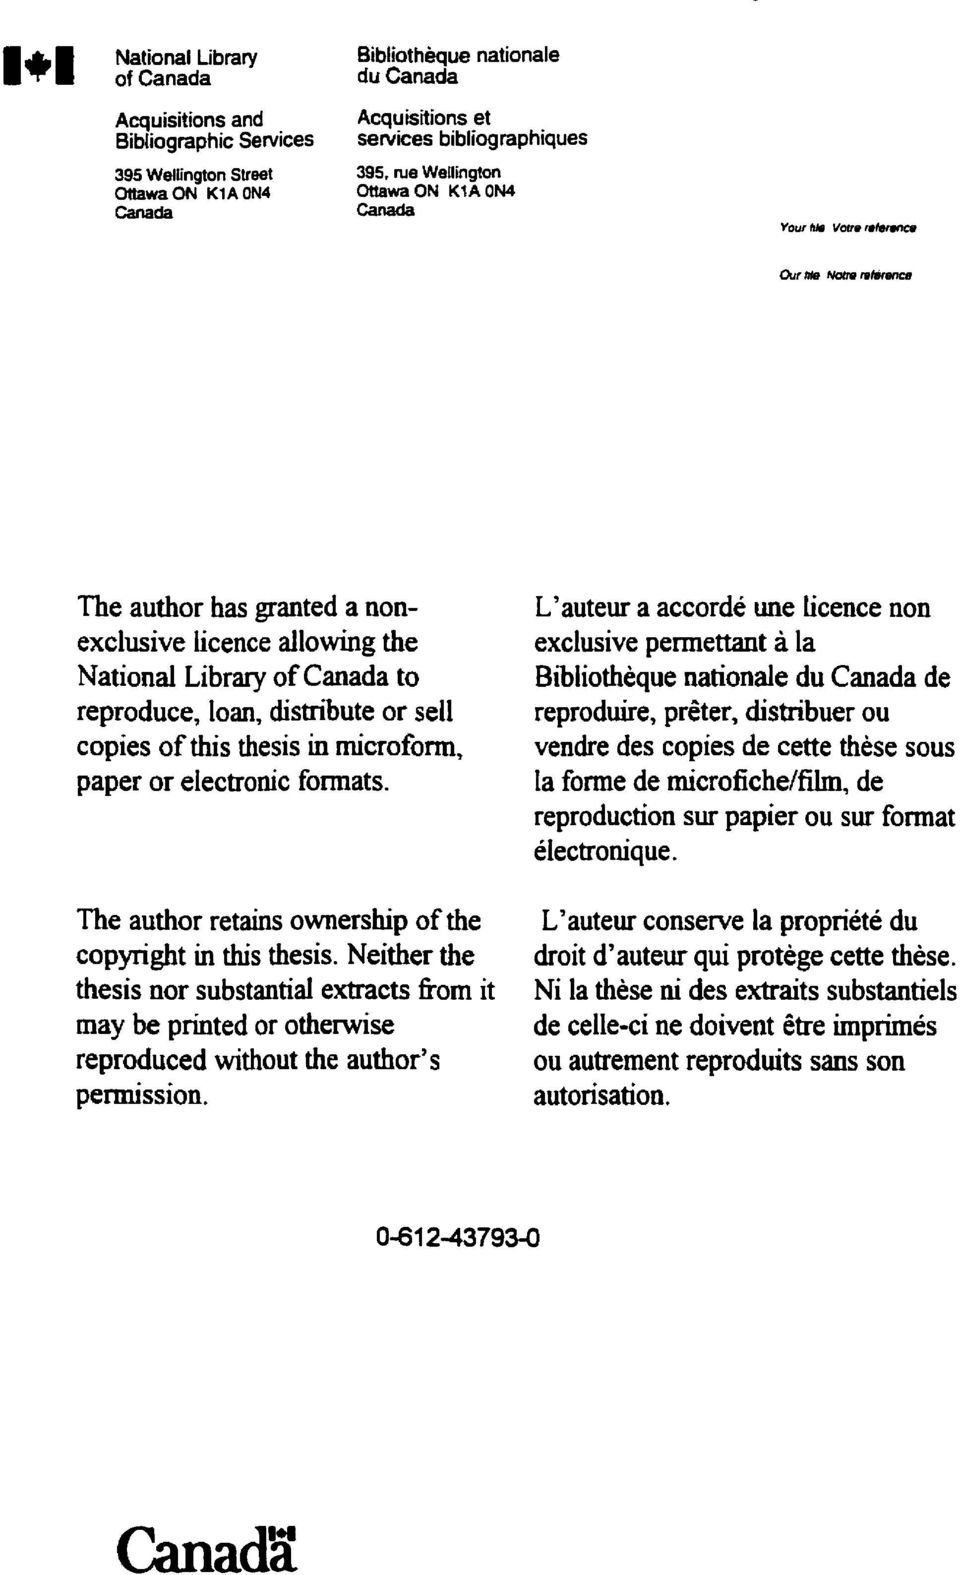 The author has granted a nonexclusive licence aflowing the National Library of Canada to reproduce, Loan, distribute or sel1 copies of this thesis in microform, paper or electronic formats.